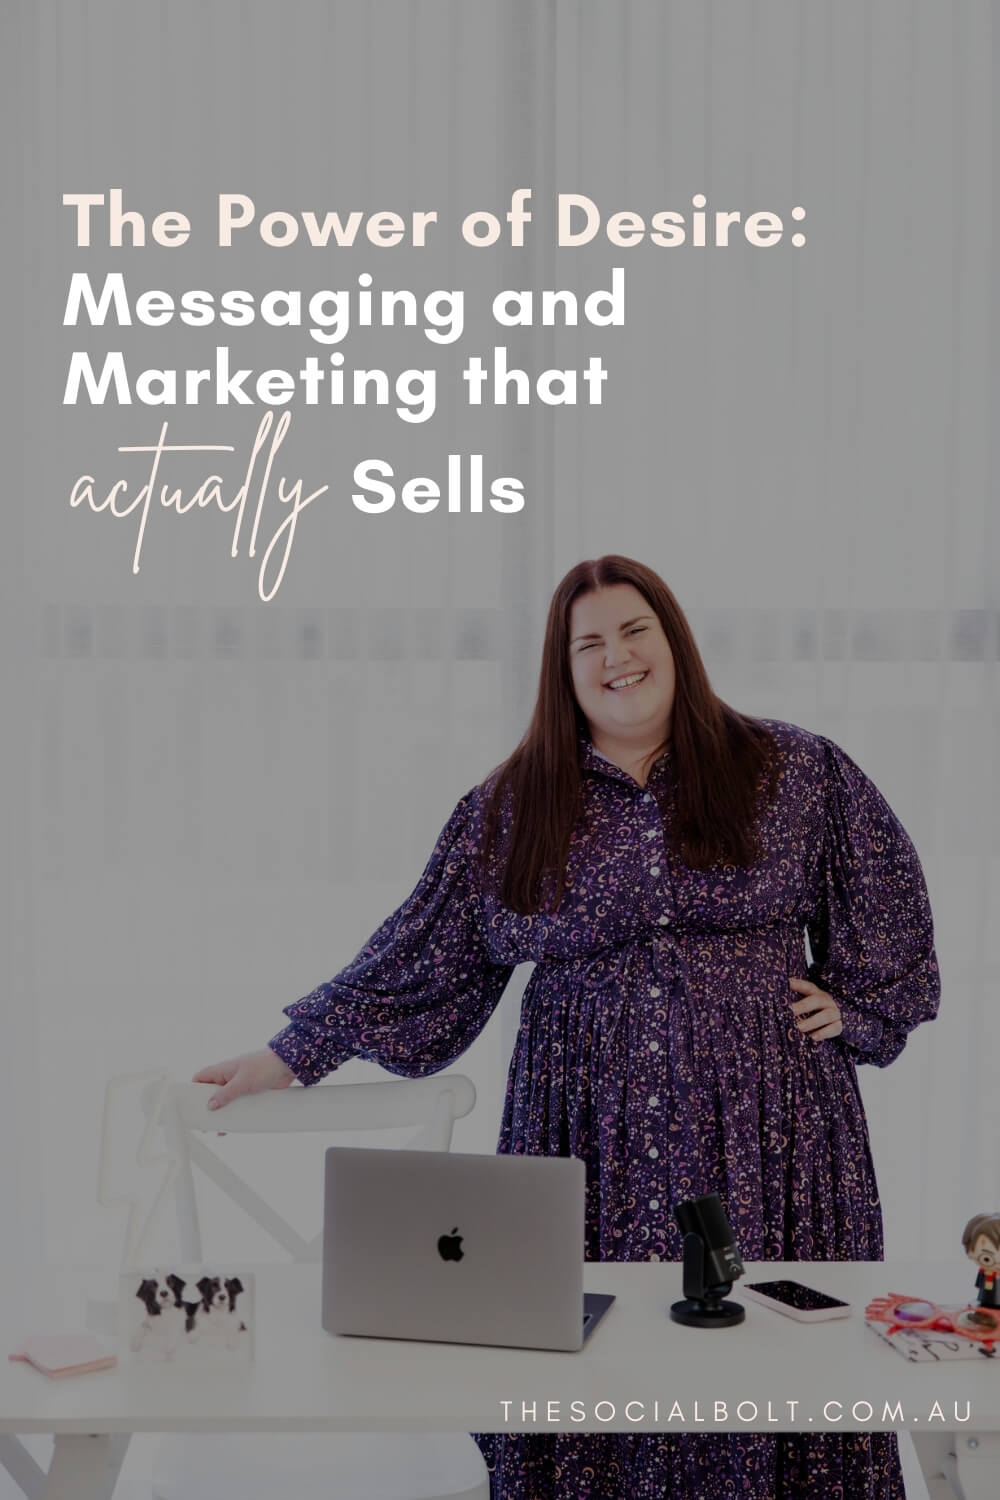 The Power of Desire: Messaging and Marketing that Sells